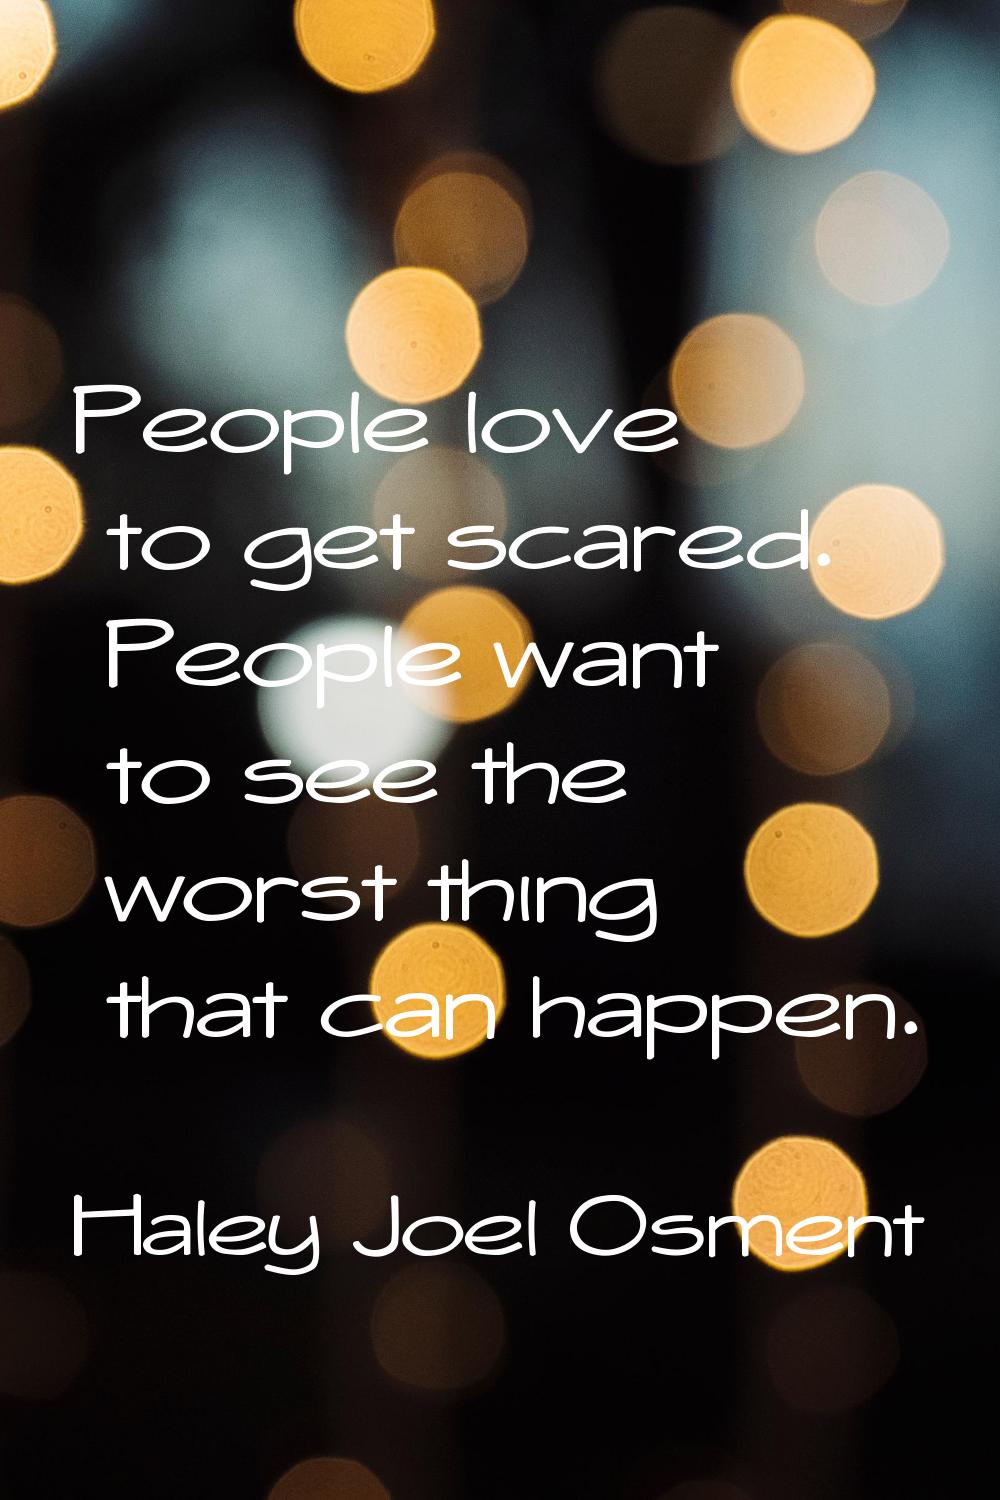 People love to get scared. People want to see the worst thing that can happen.